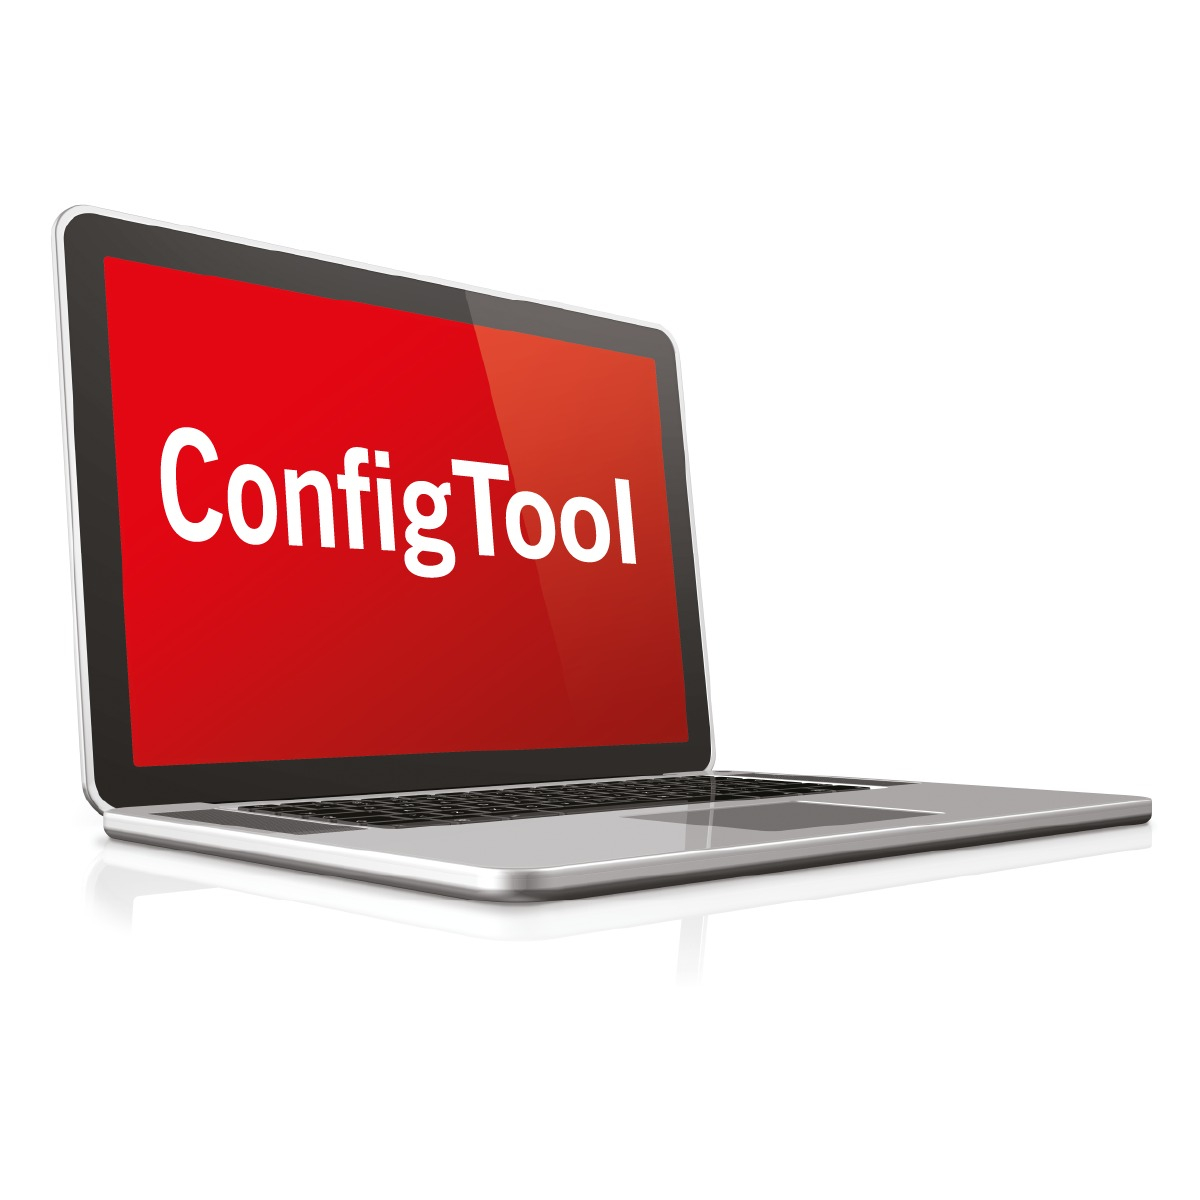 An open laptop displaying a red screen with the text 'ConfigTool'